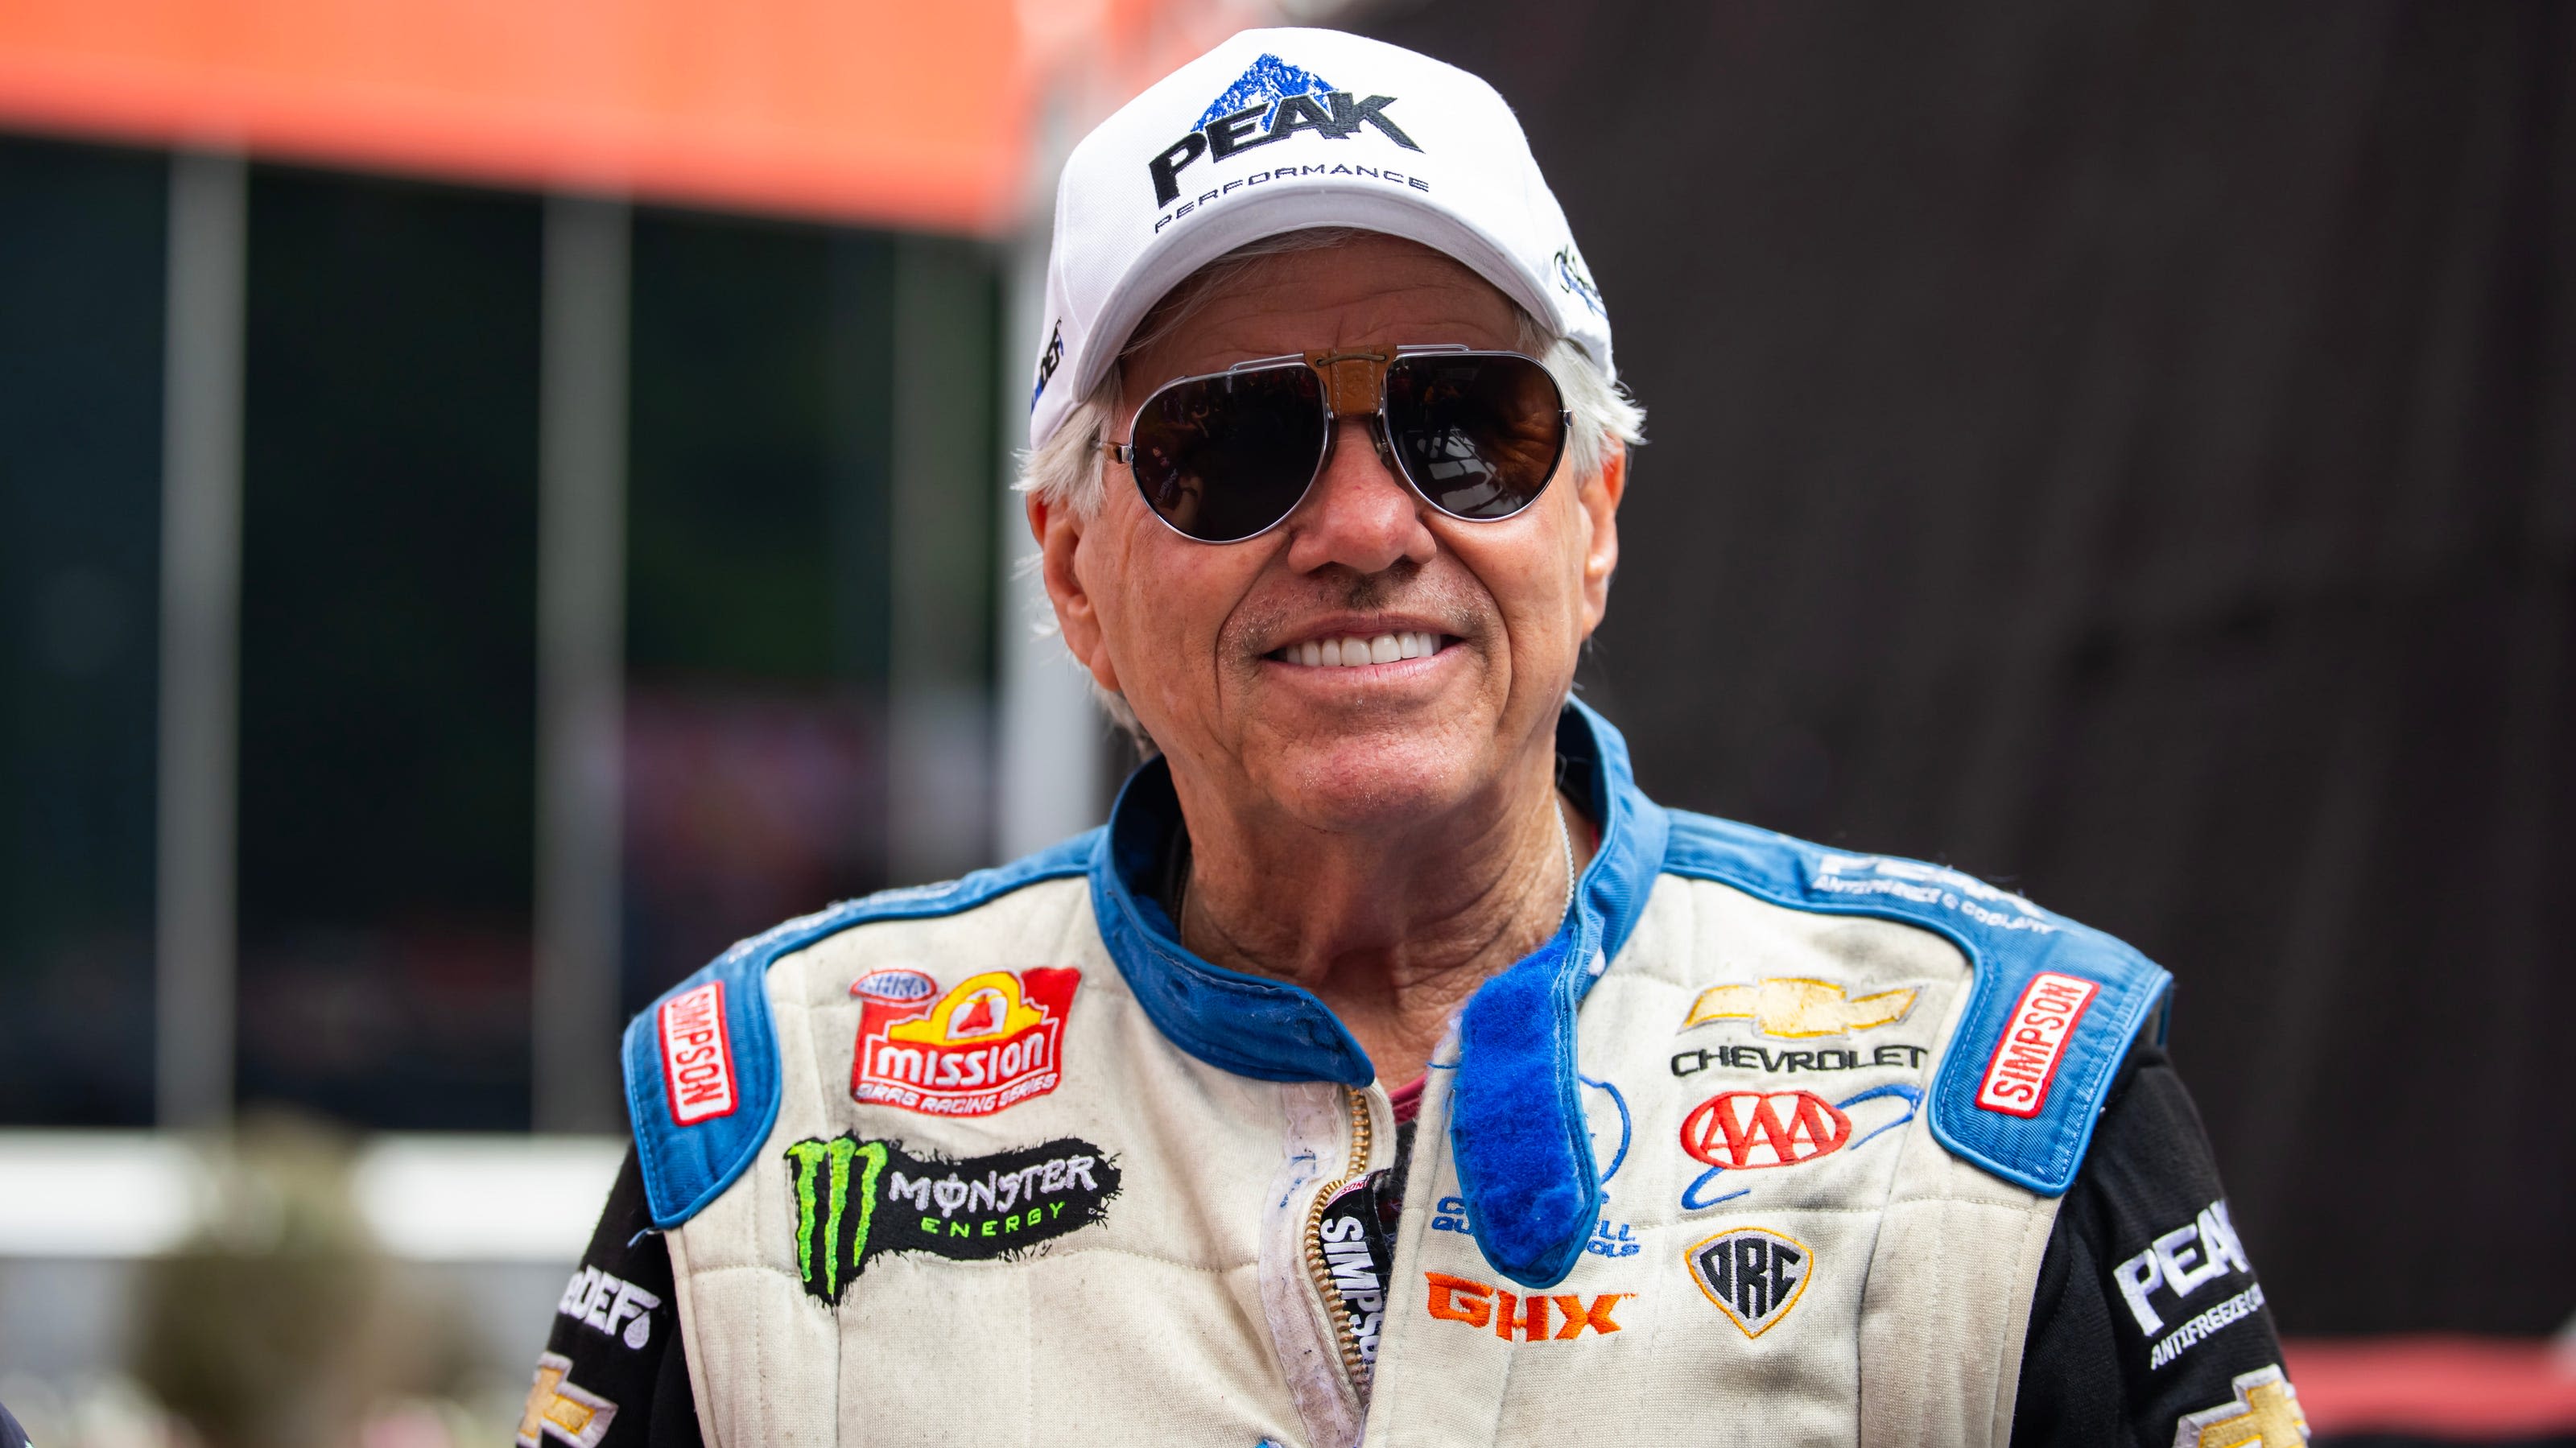 NHRA legend John Force released from rehab center one month after fiery crash